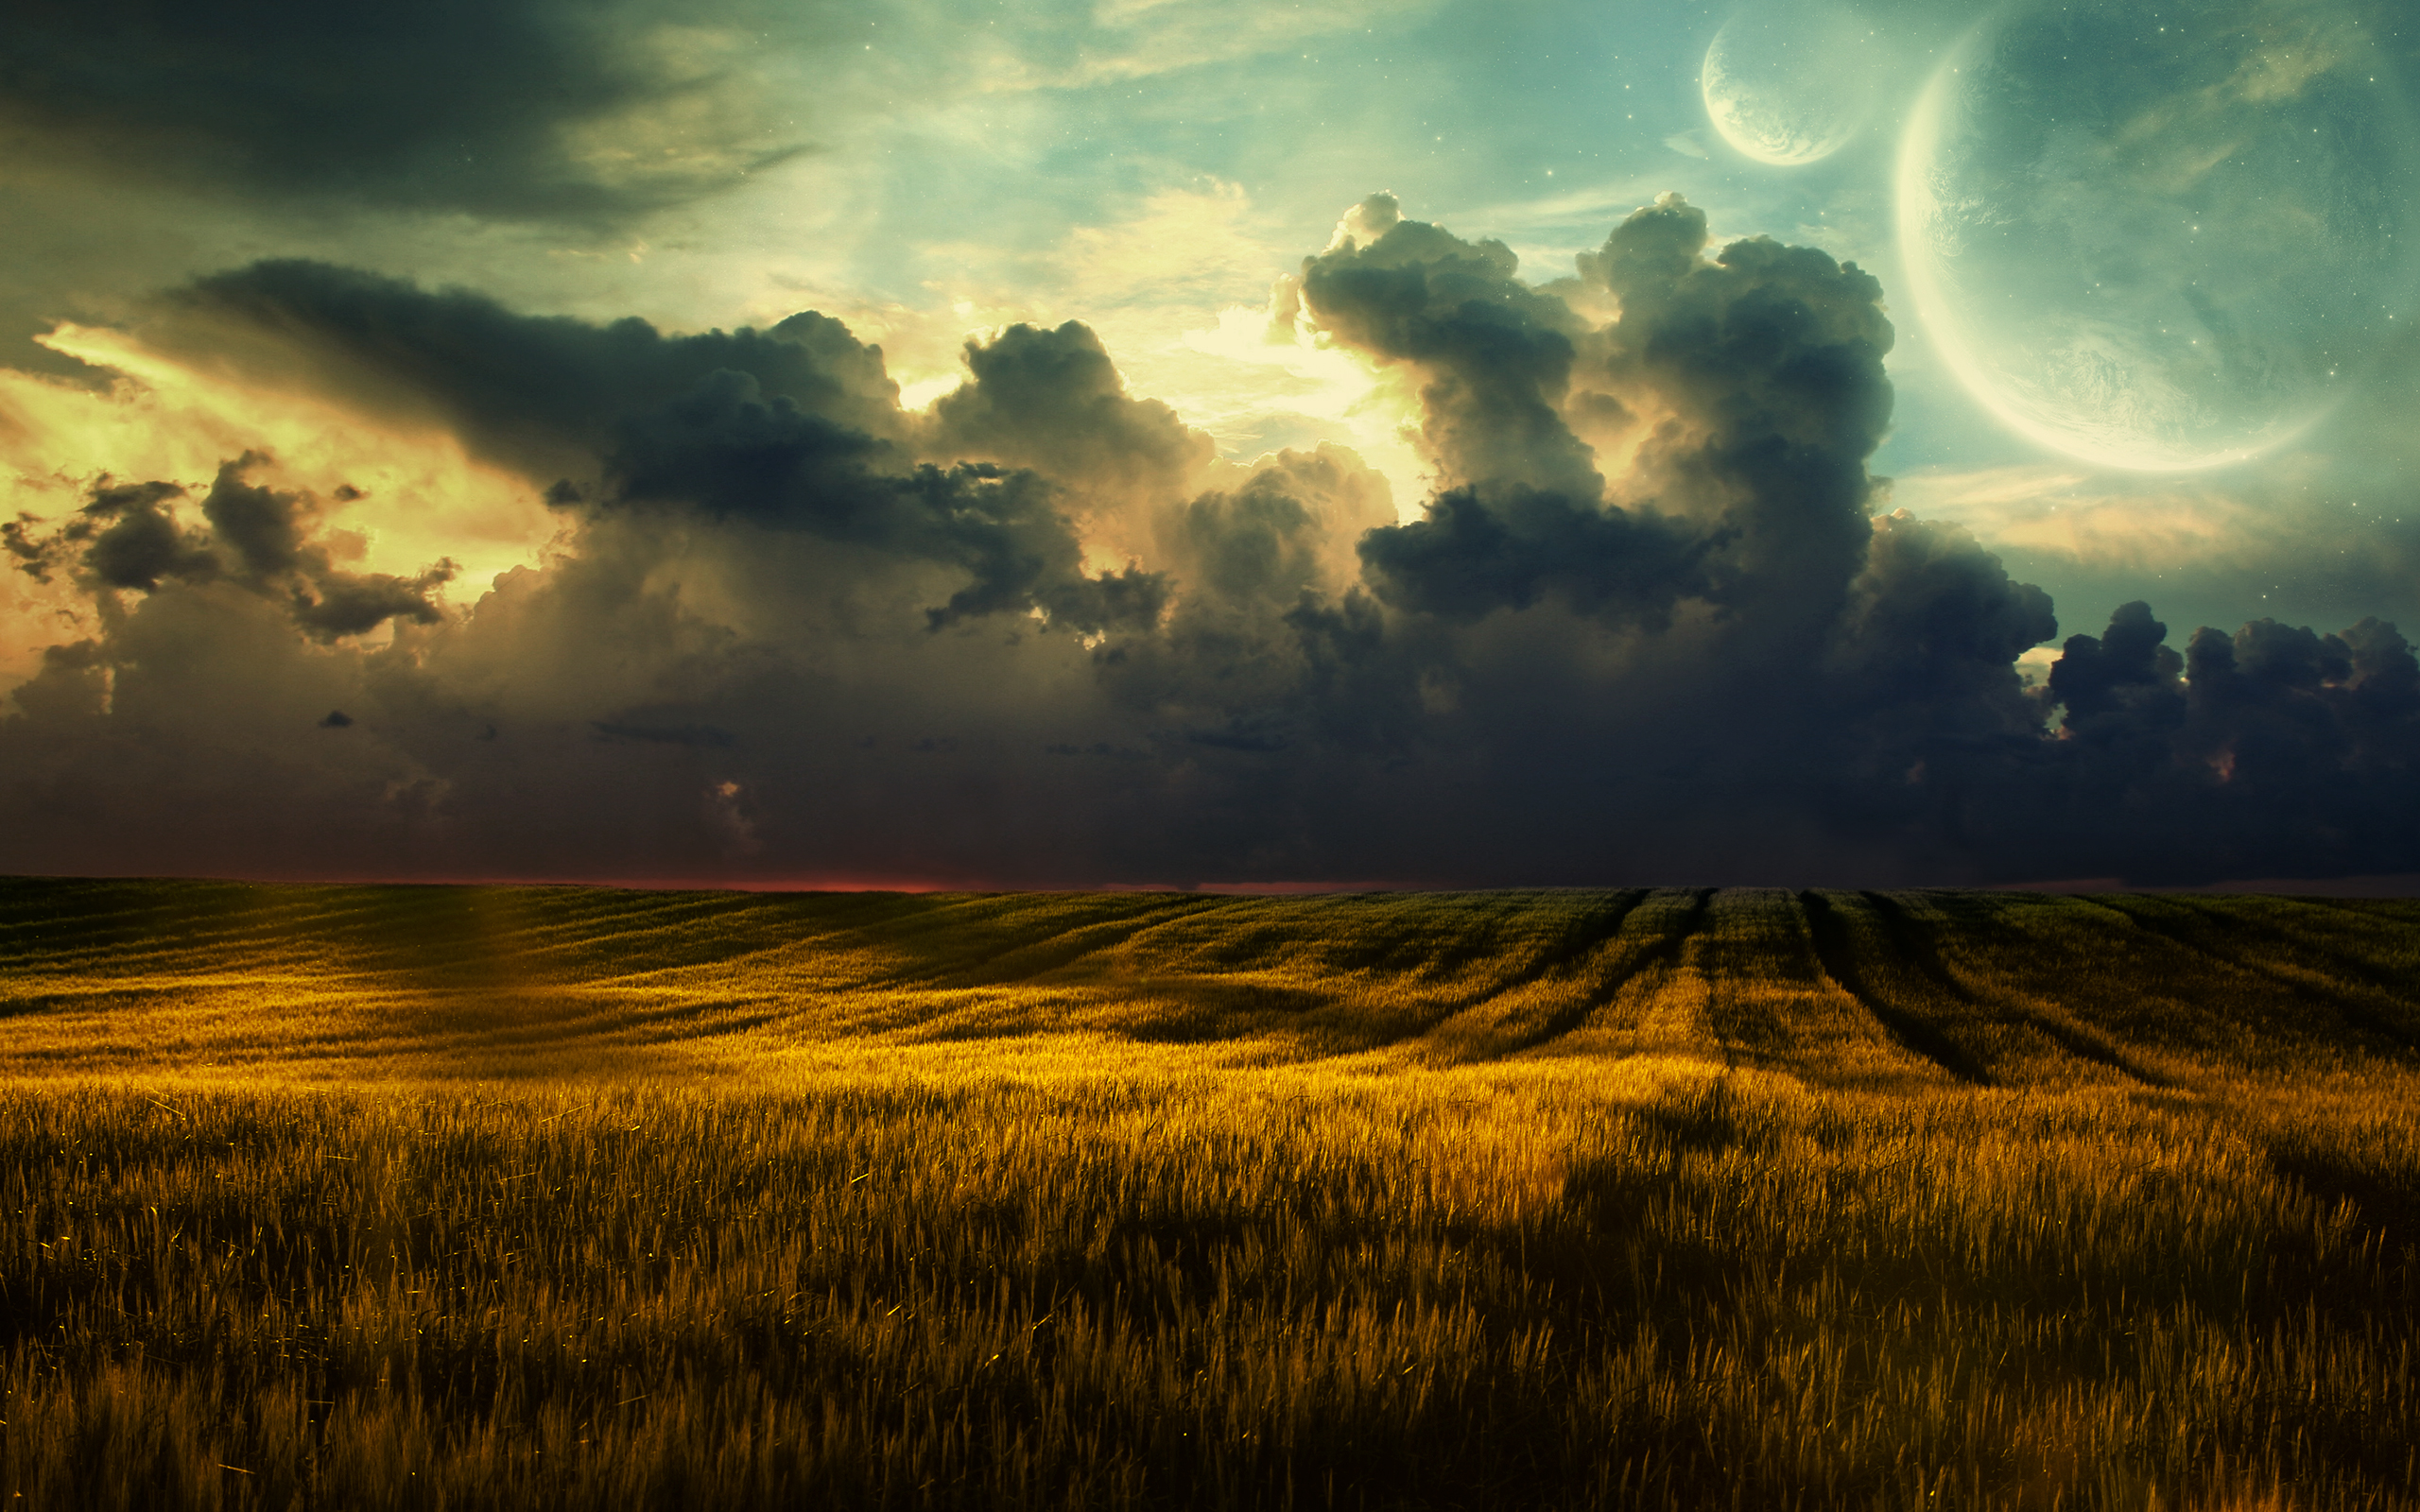 Scenic night landscape featuring a moonlit field, cloudy sky, and distant planet.